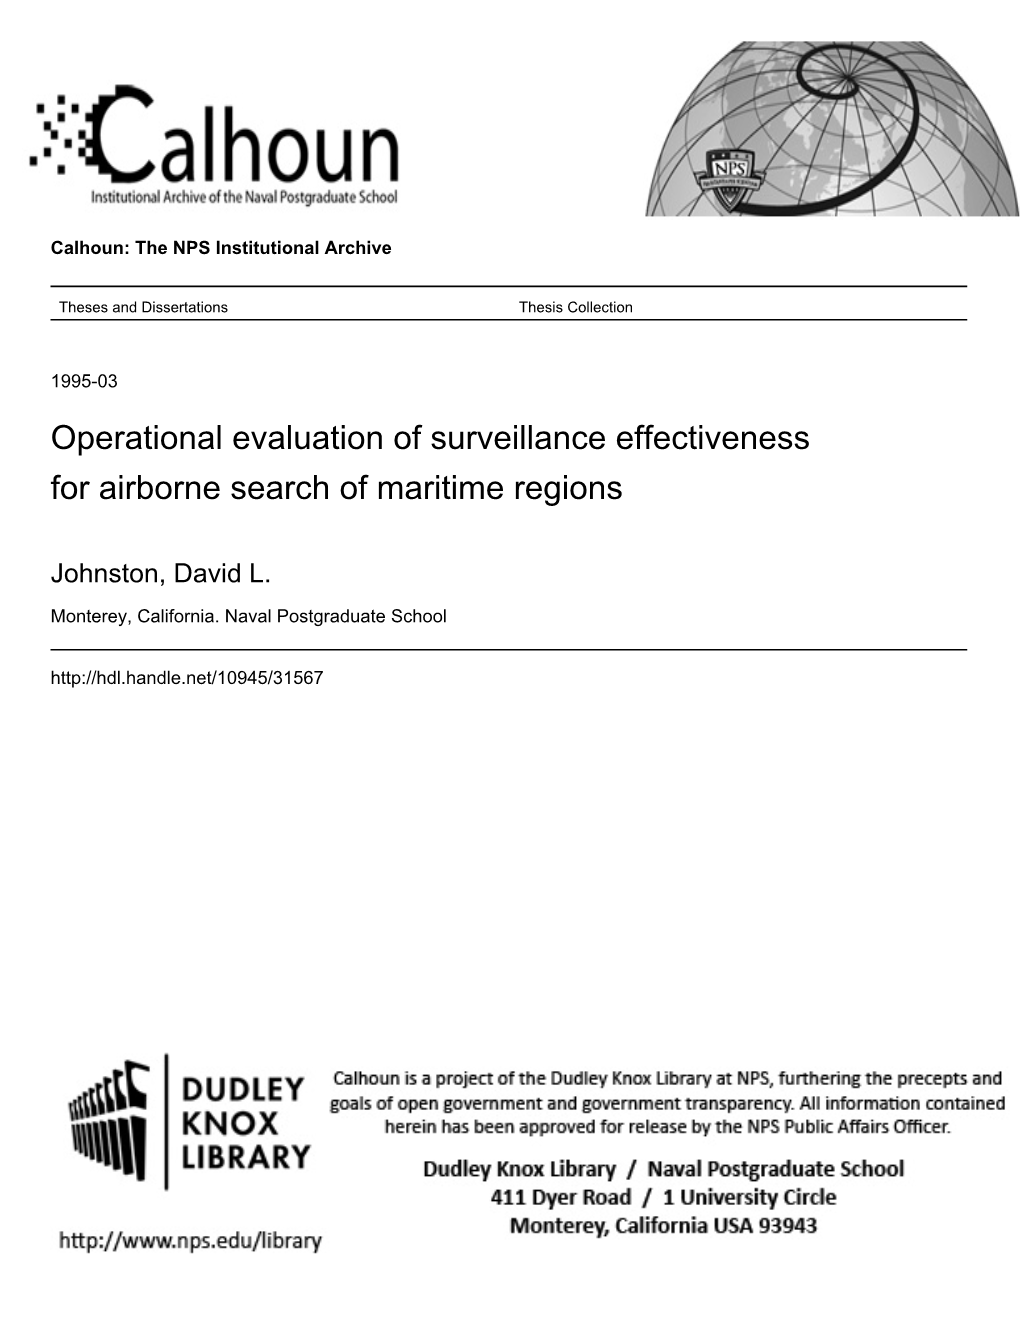 Operational Evaluation of Surveillance Effectiveness for Airborne Search of Maritime Regions